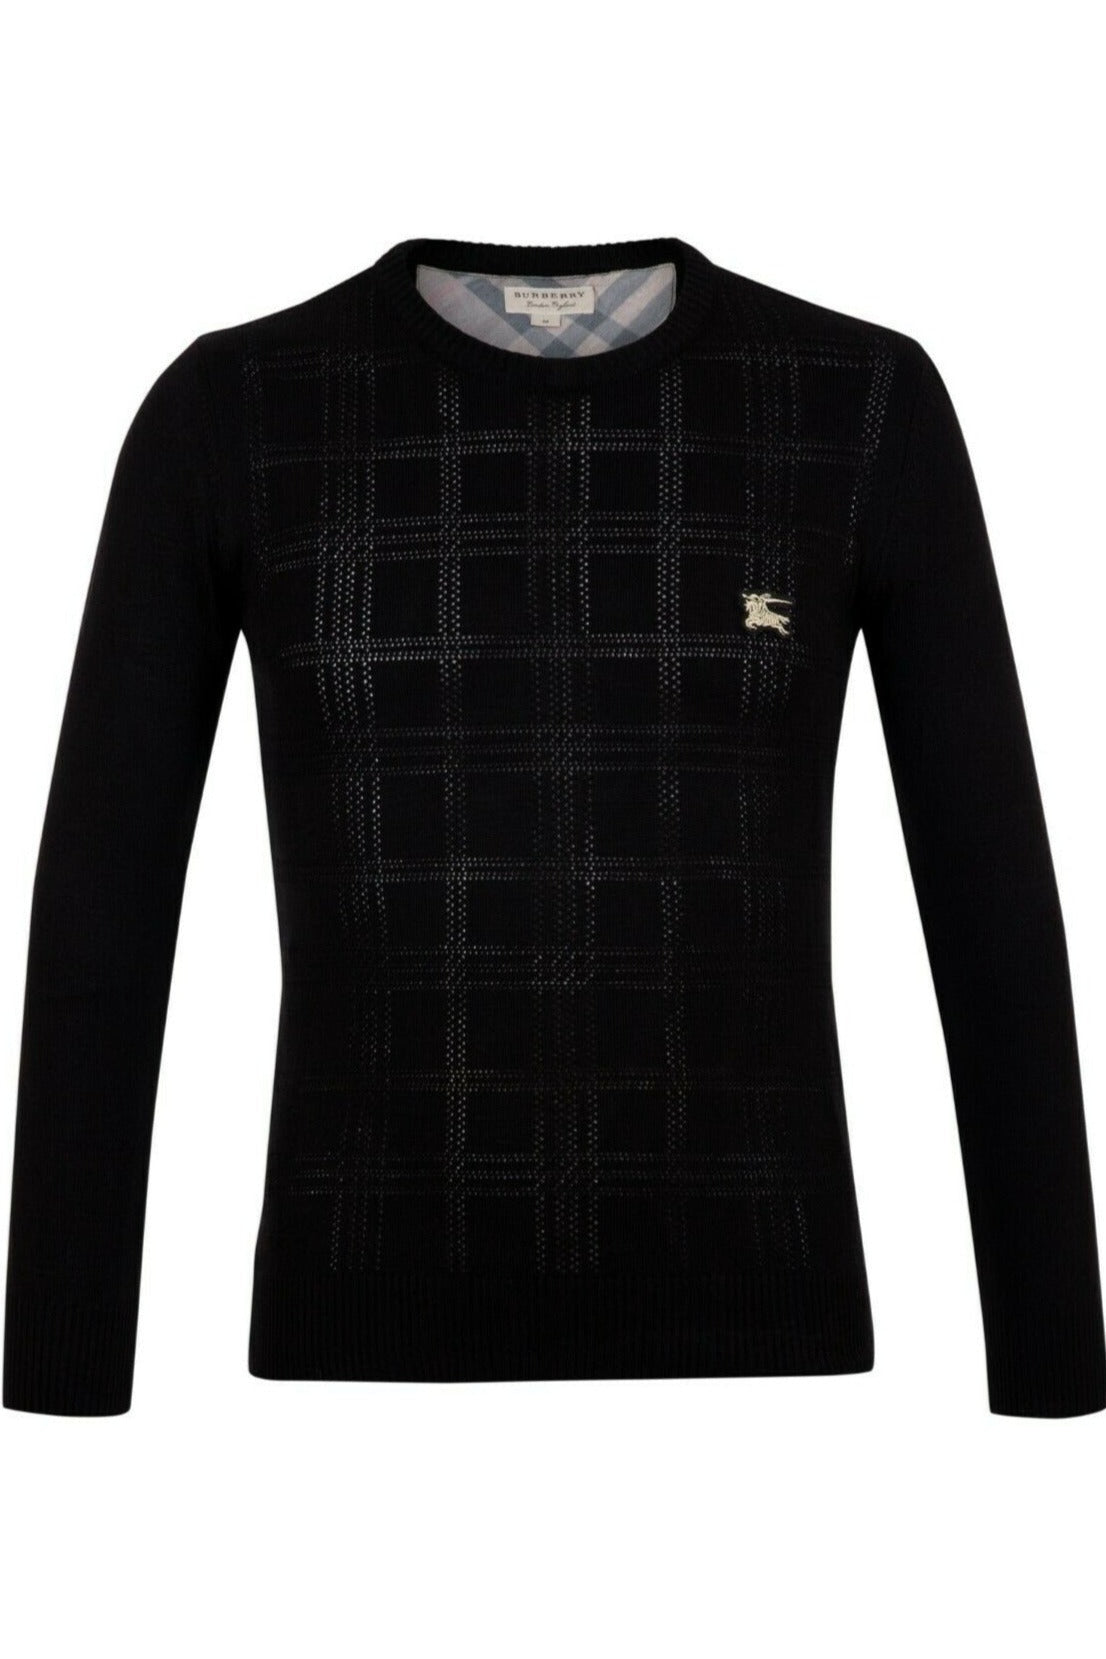 Burberry Black  Jumper Pullover Sweater Slim Fit Size !